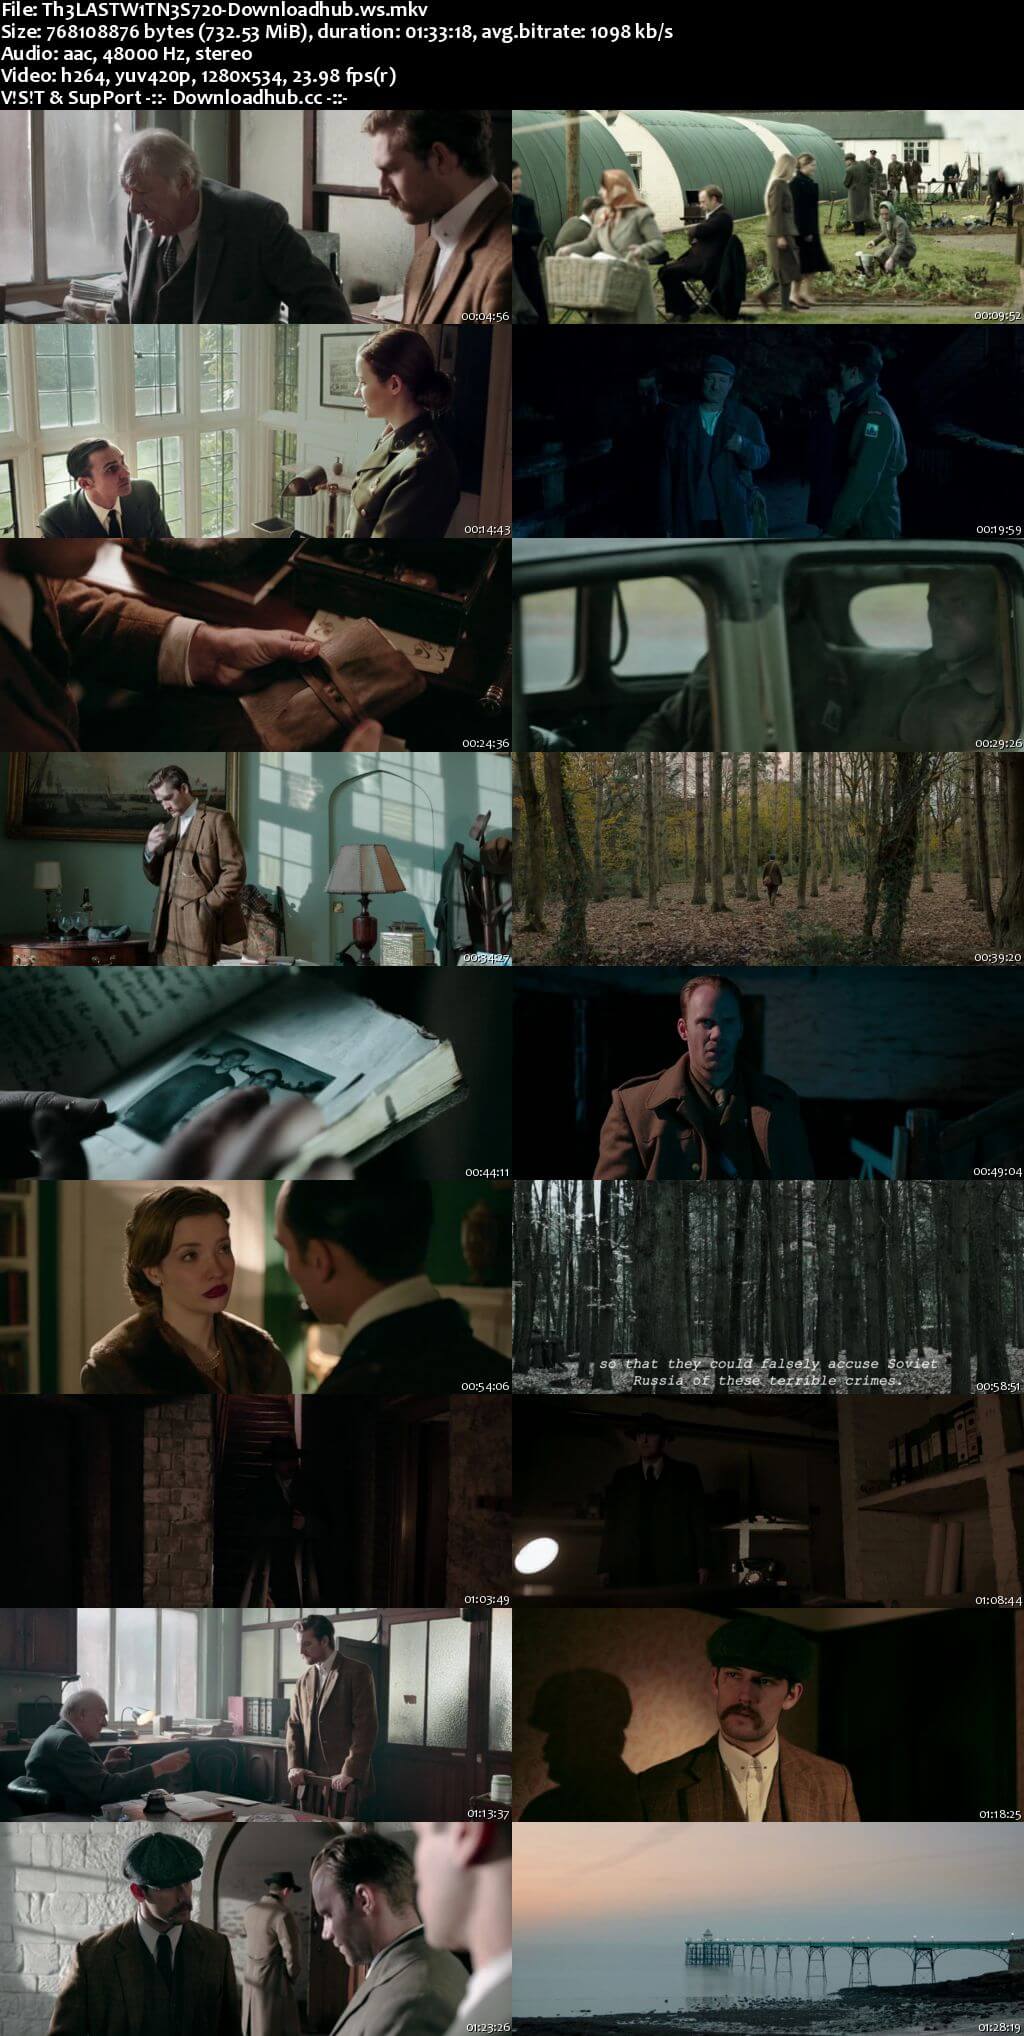 The Last Witness 2018 English 720p Web-DL 700MB ESubs